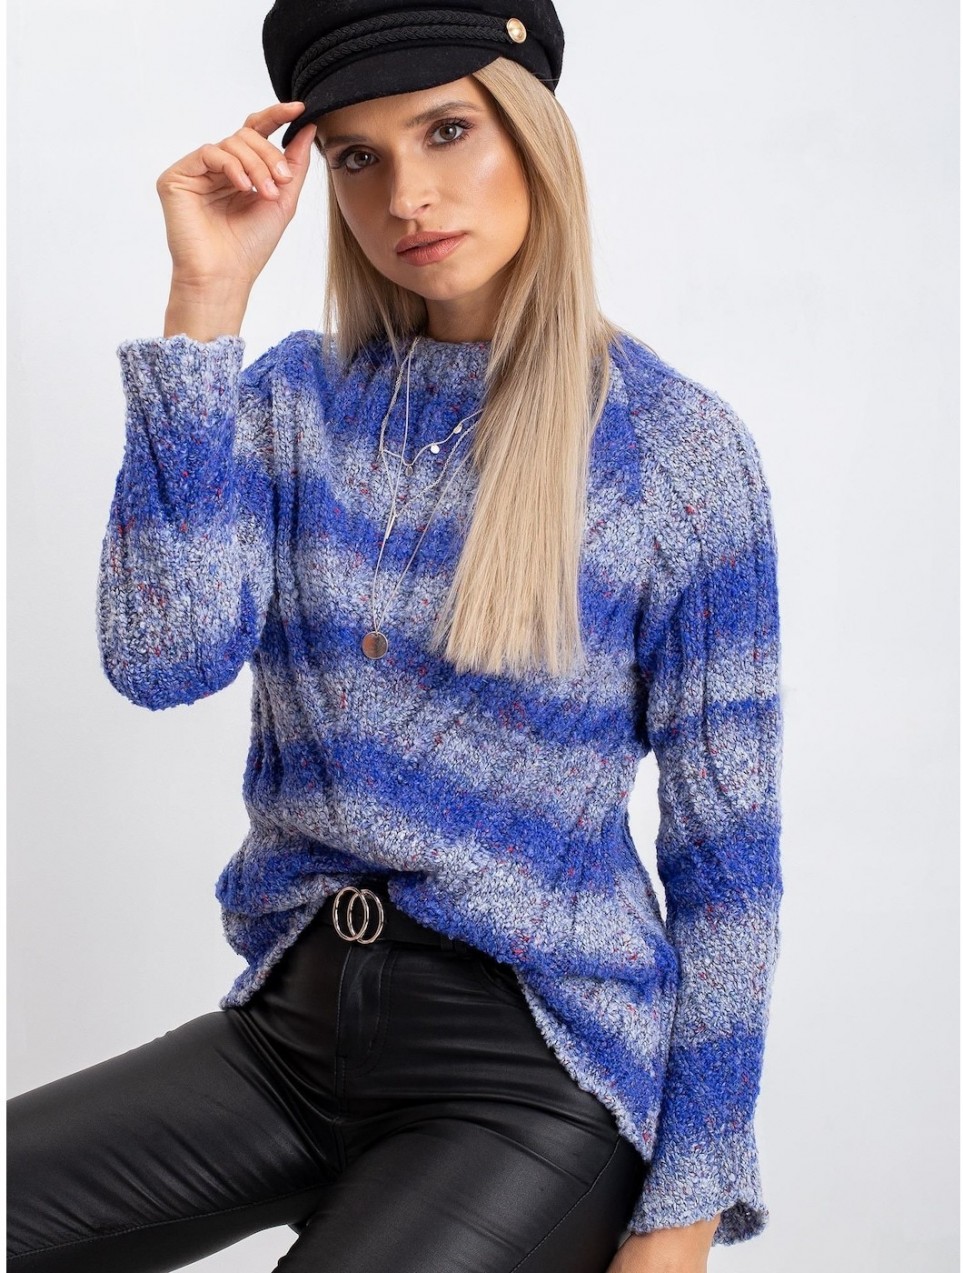 Blue sweater with a colored thread